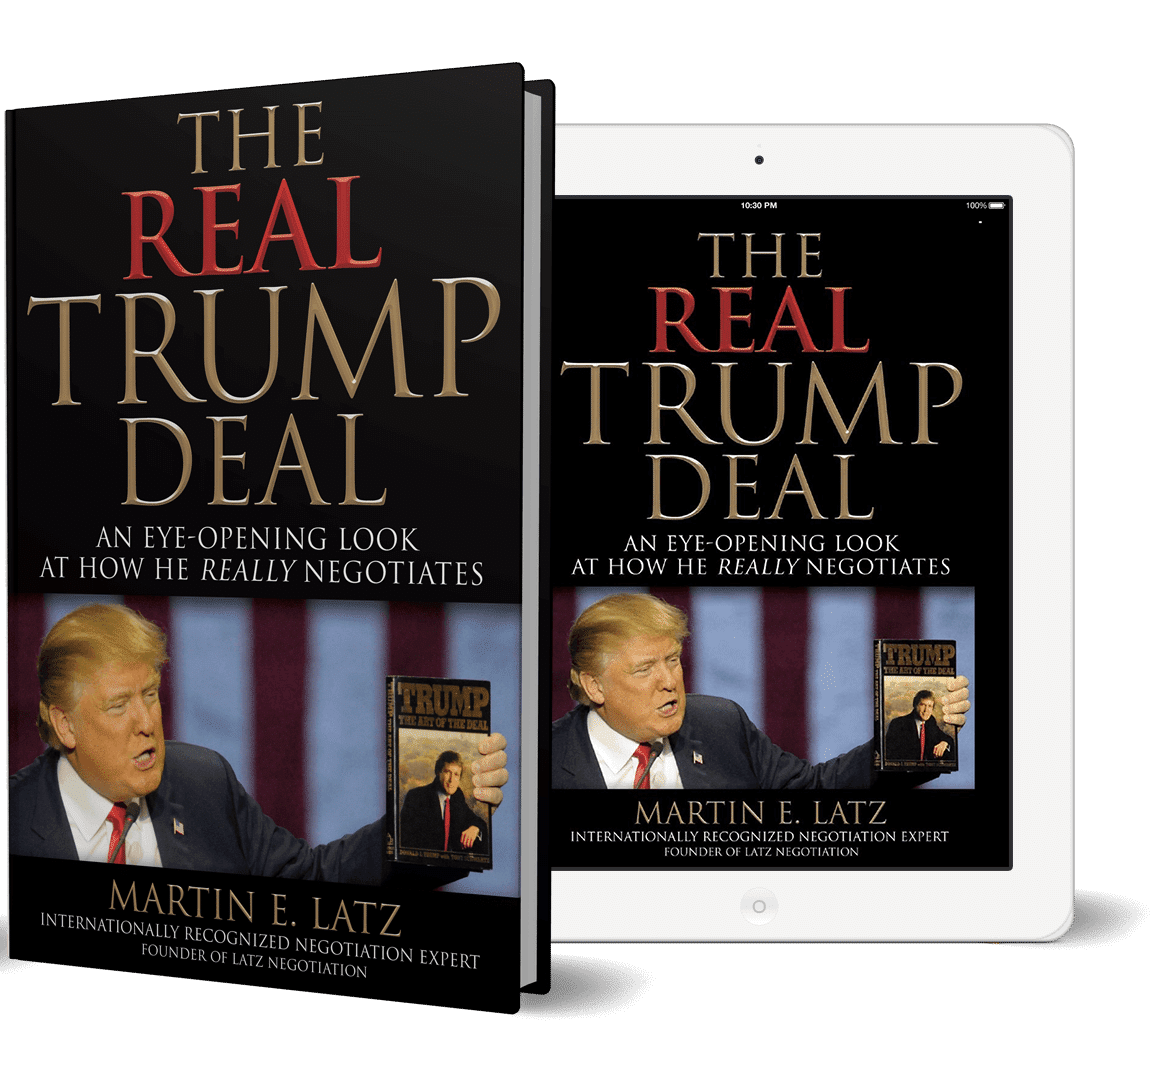 The Real Trump Deal - Trump's Negotiations by Marty Latz